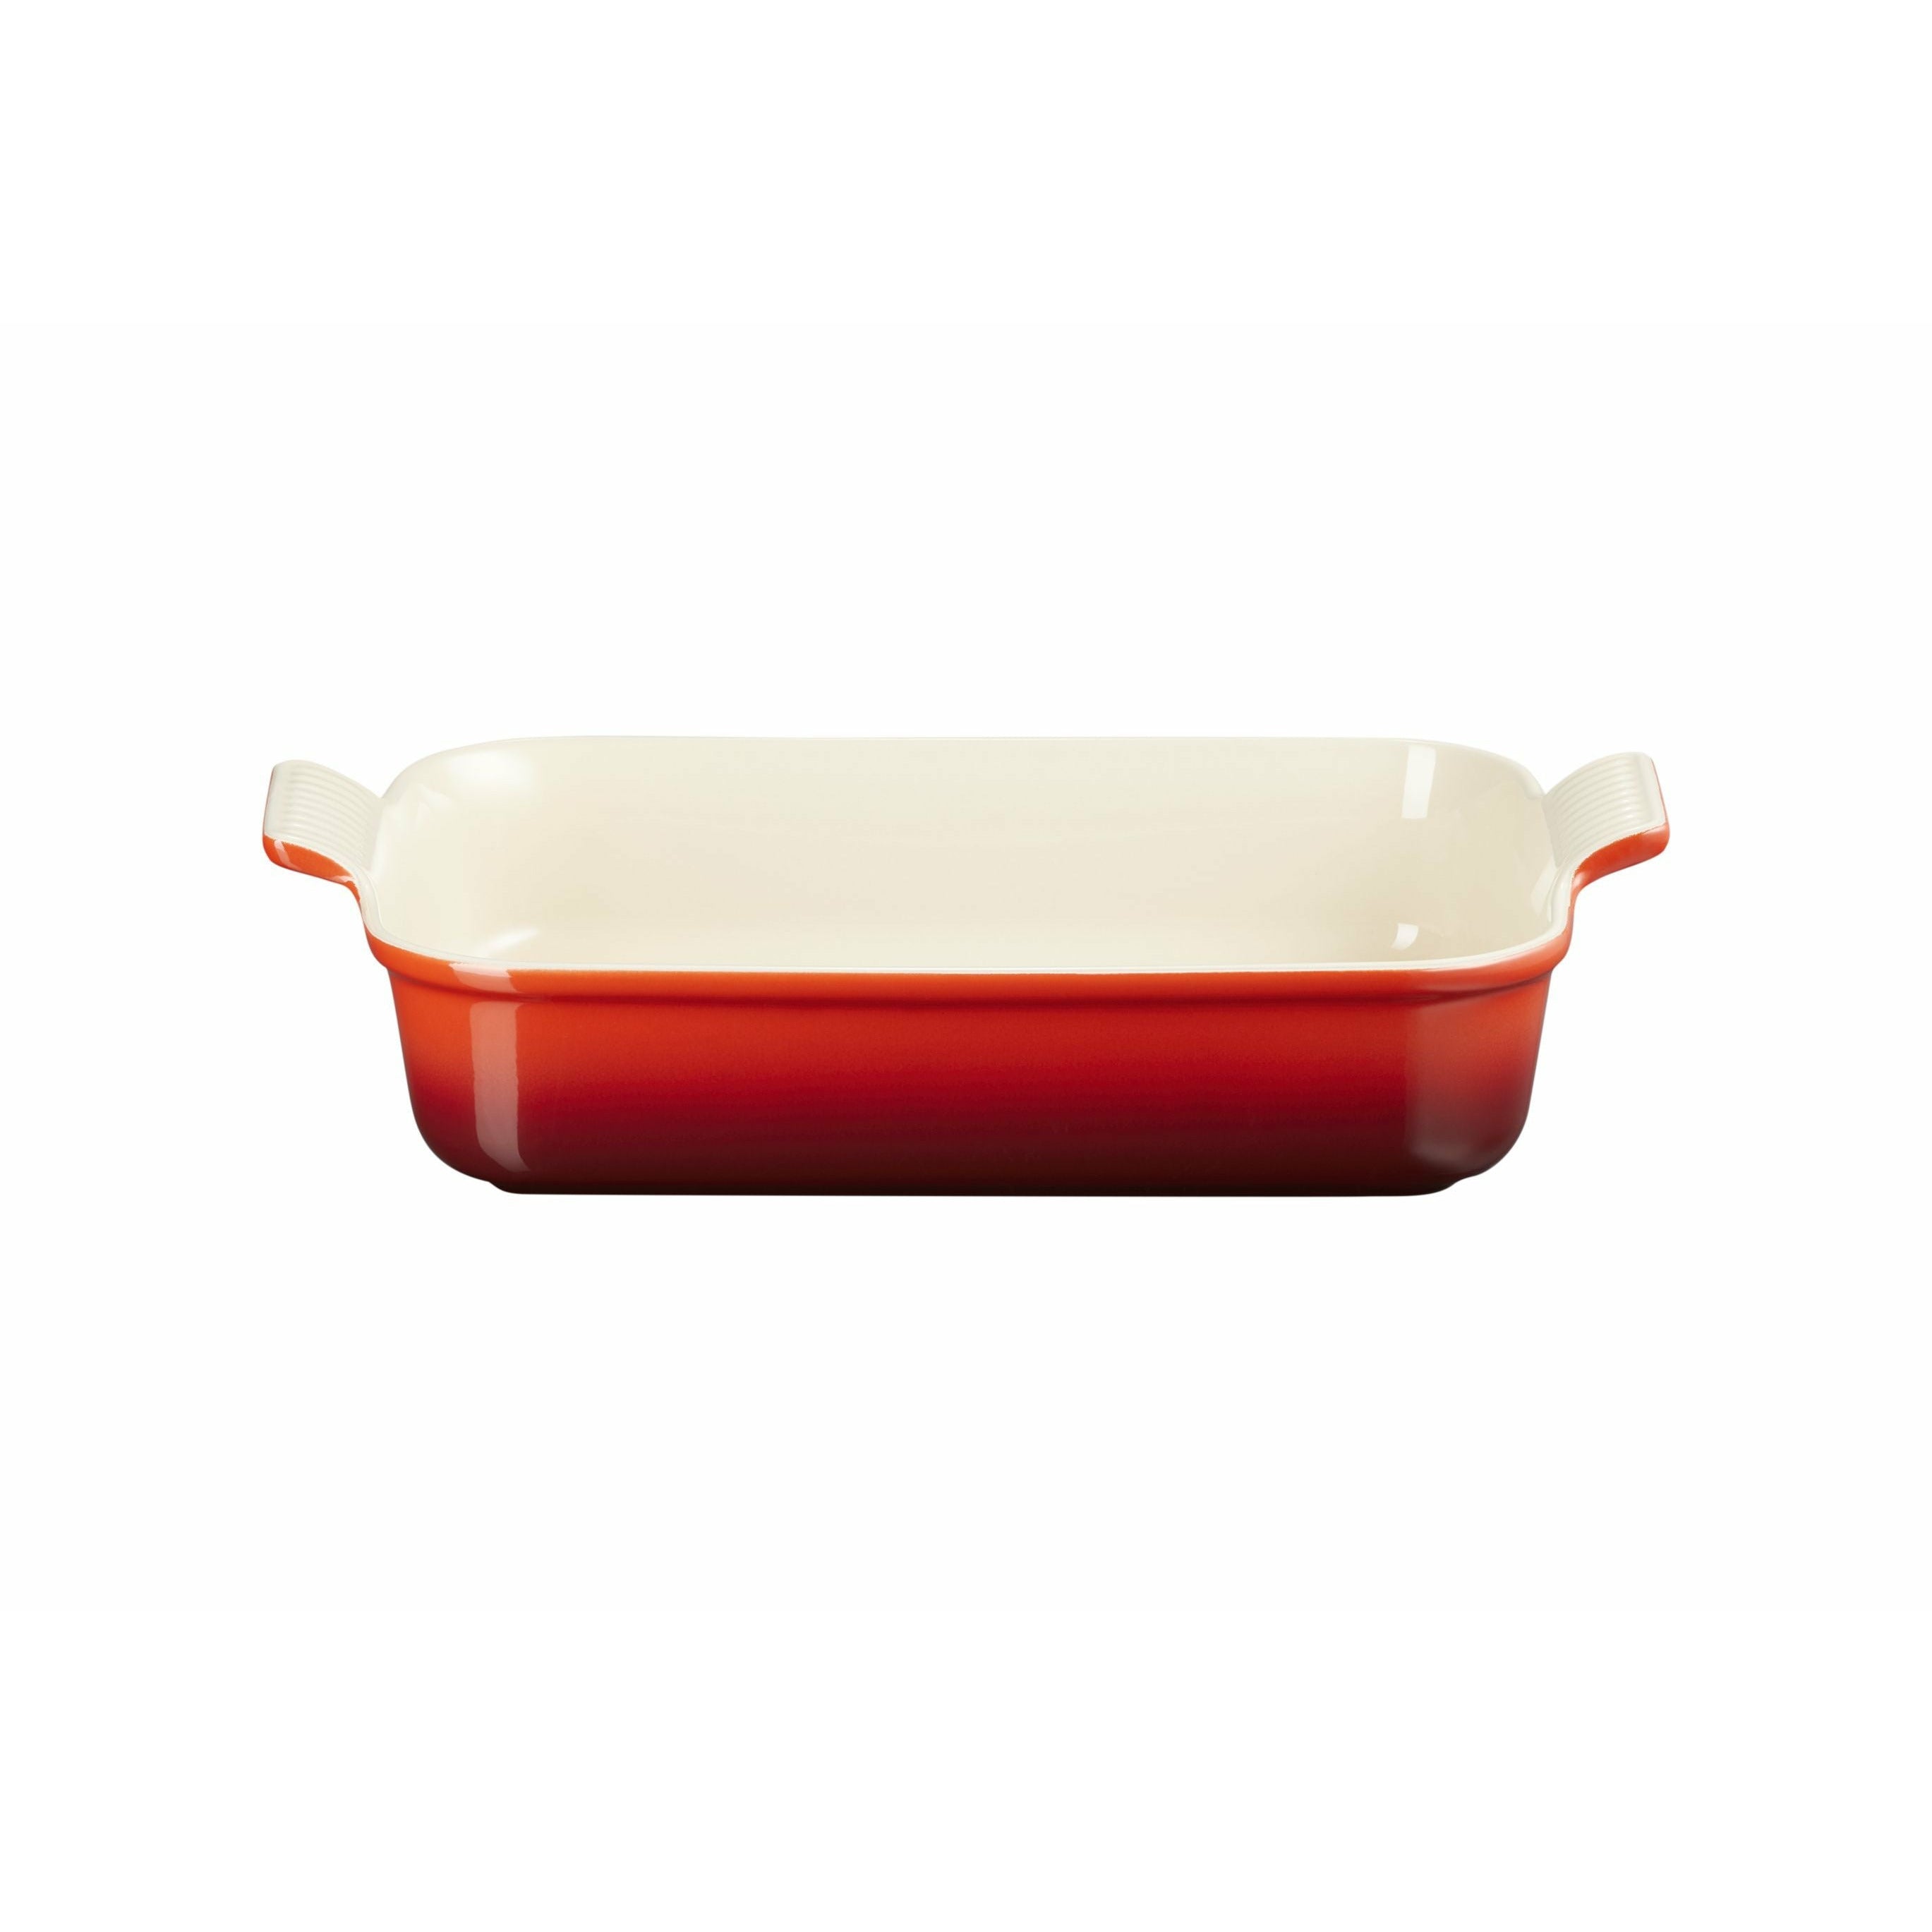 Le Creuset Rectangular Baking Dish Tradition 32 Cm, Cherry Red